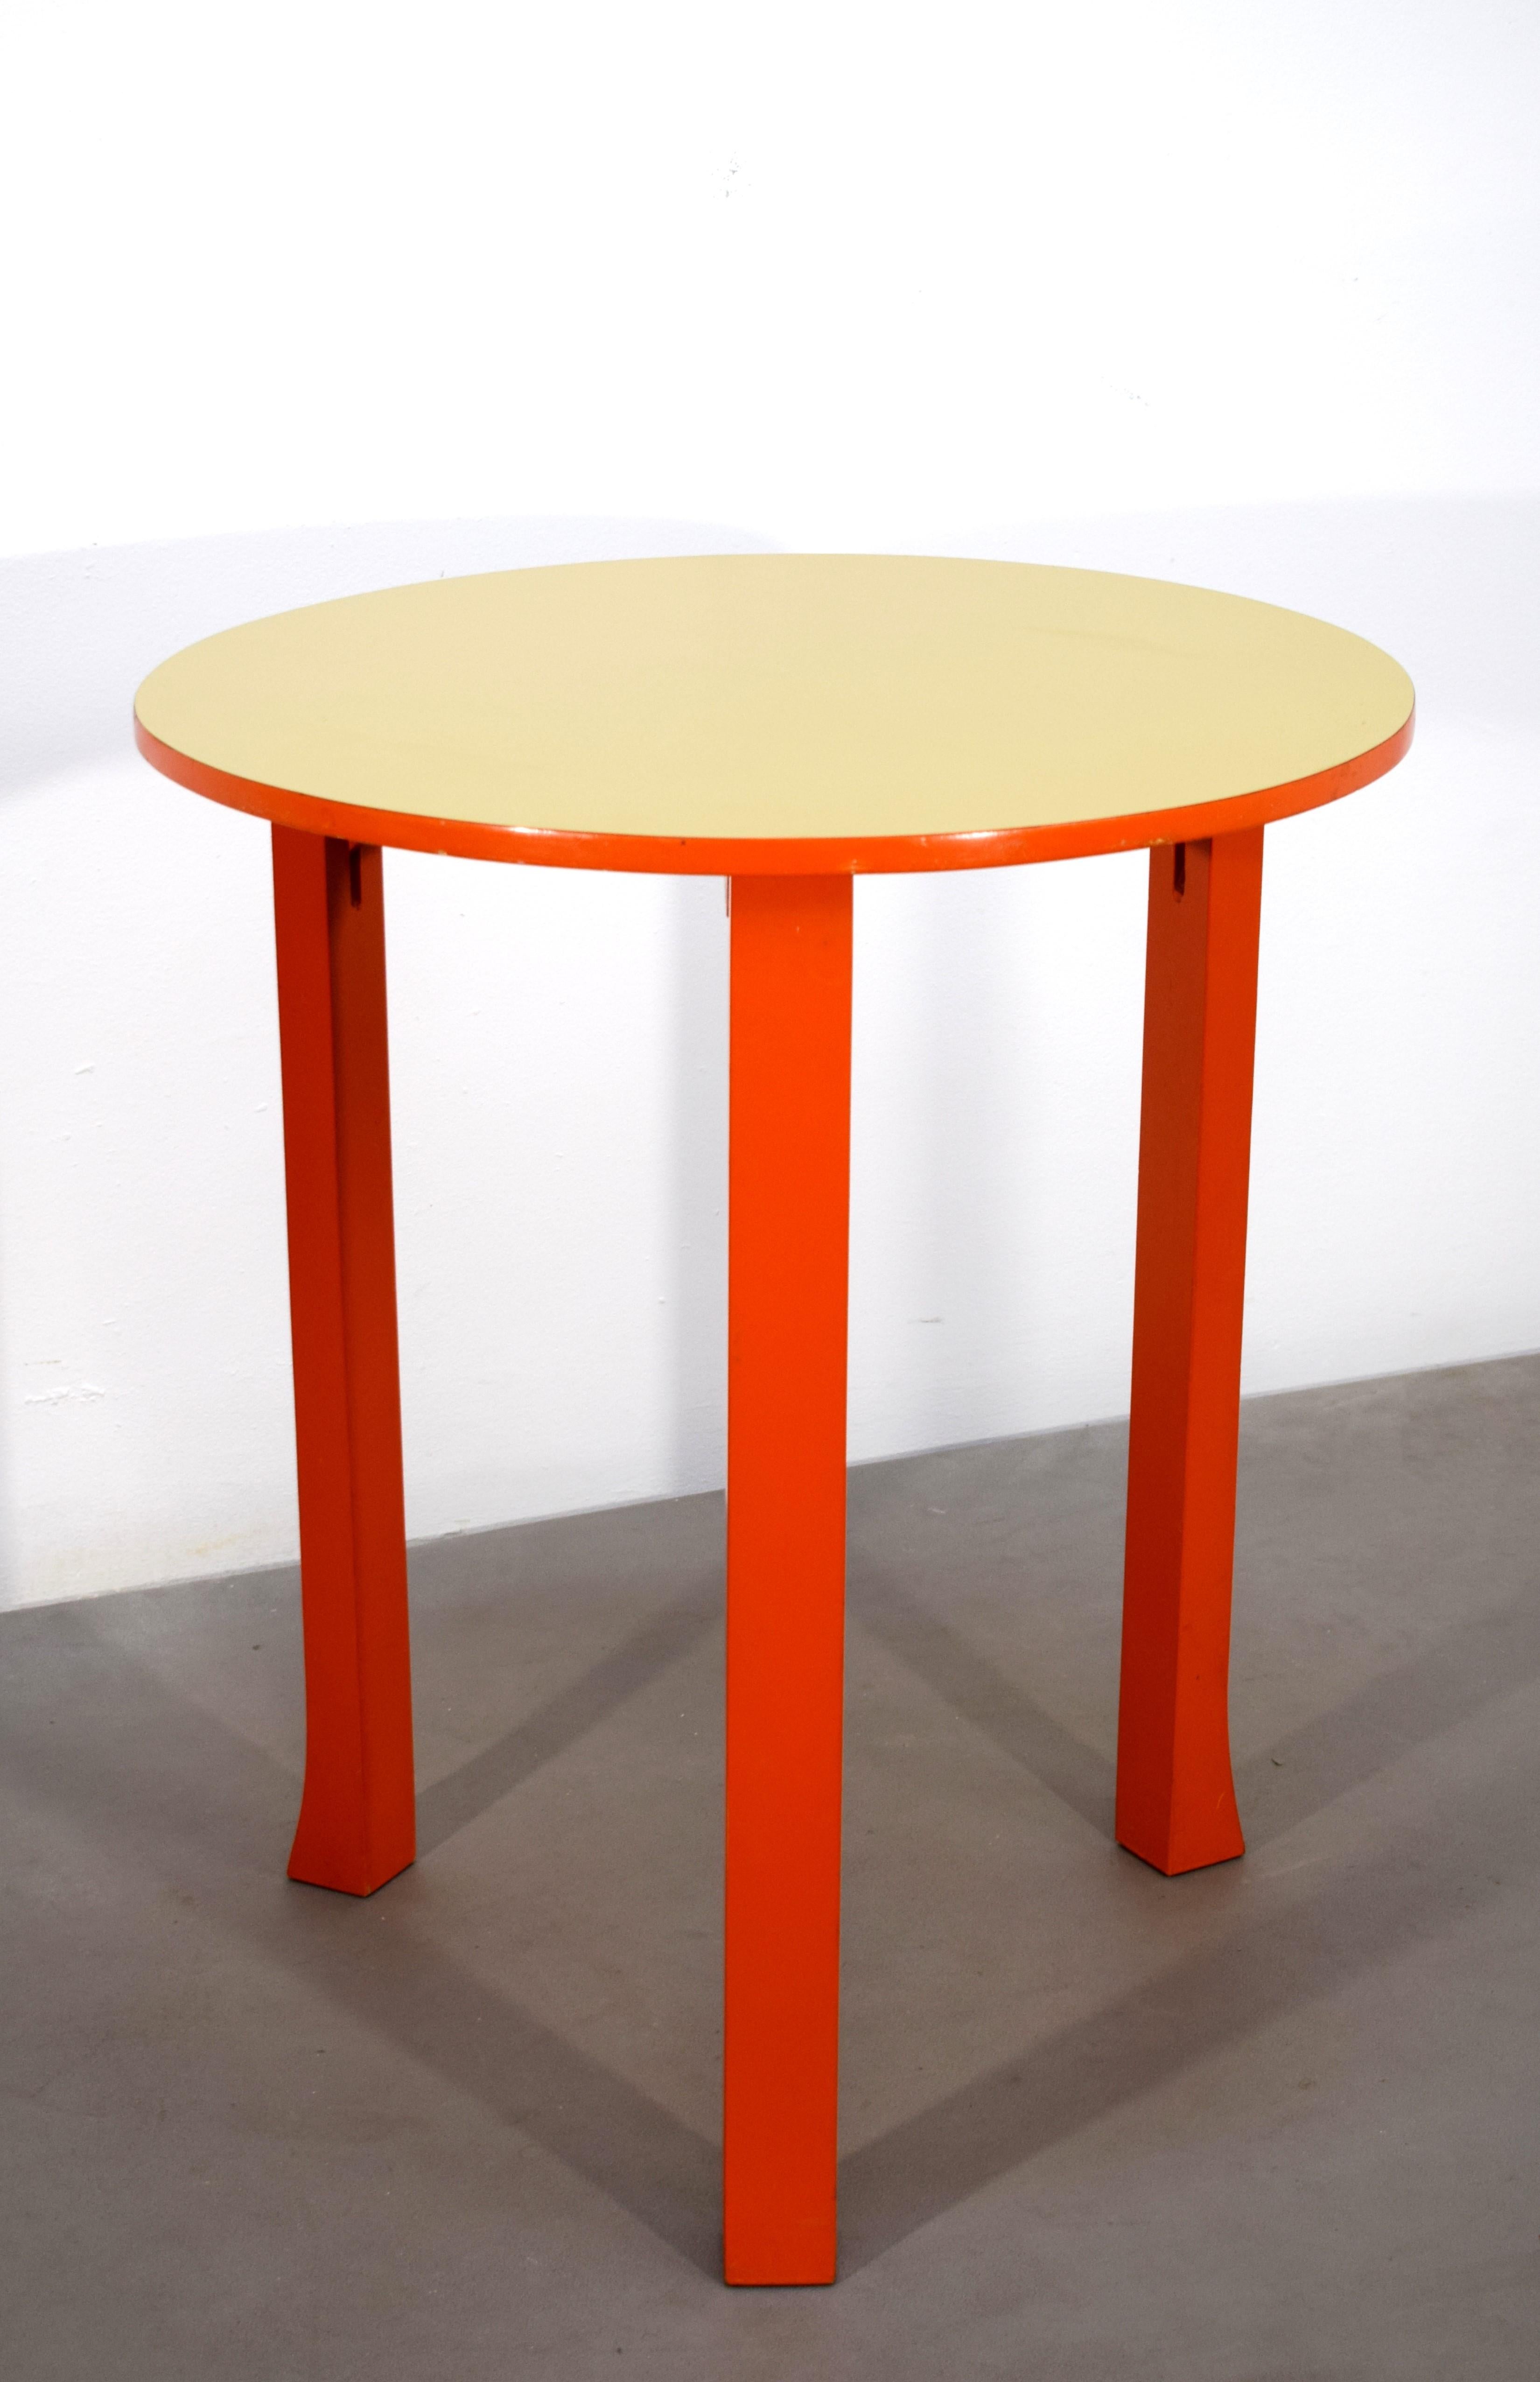 Italian small dining table, lacquered wood, 1960s.
Dimensions: H= 72 cm; D= 63 cm.